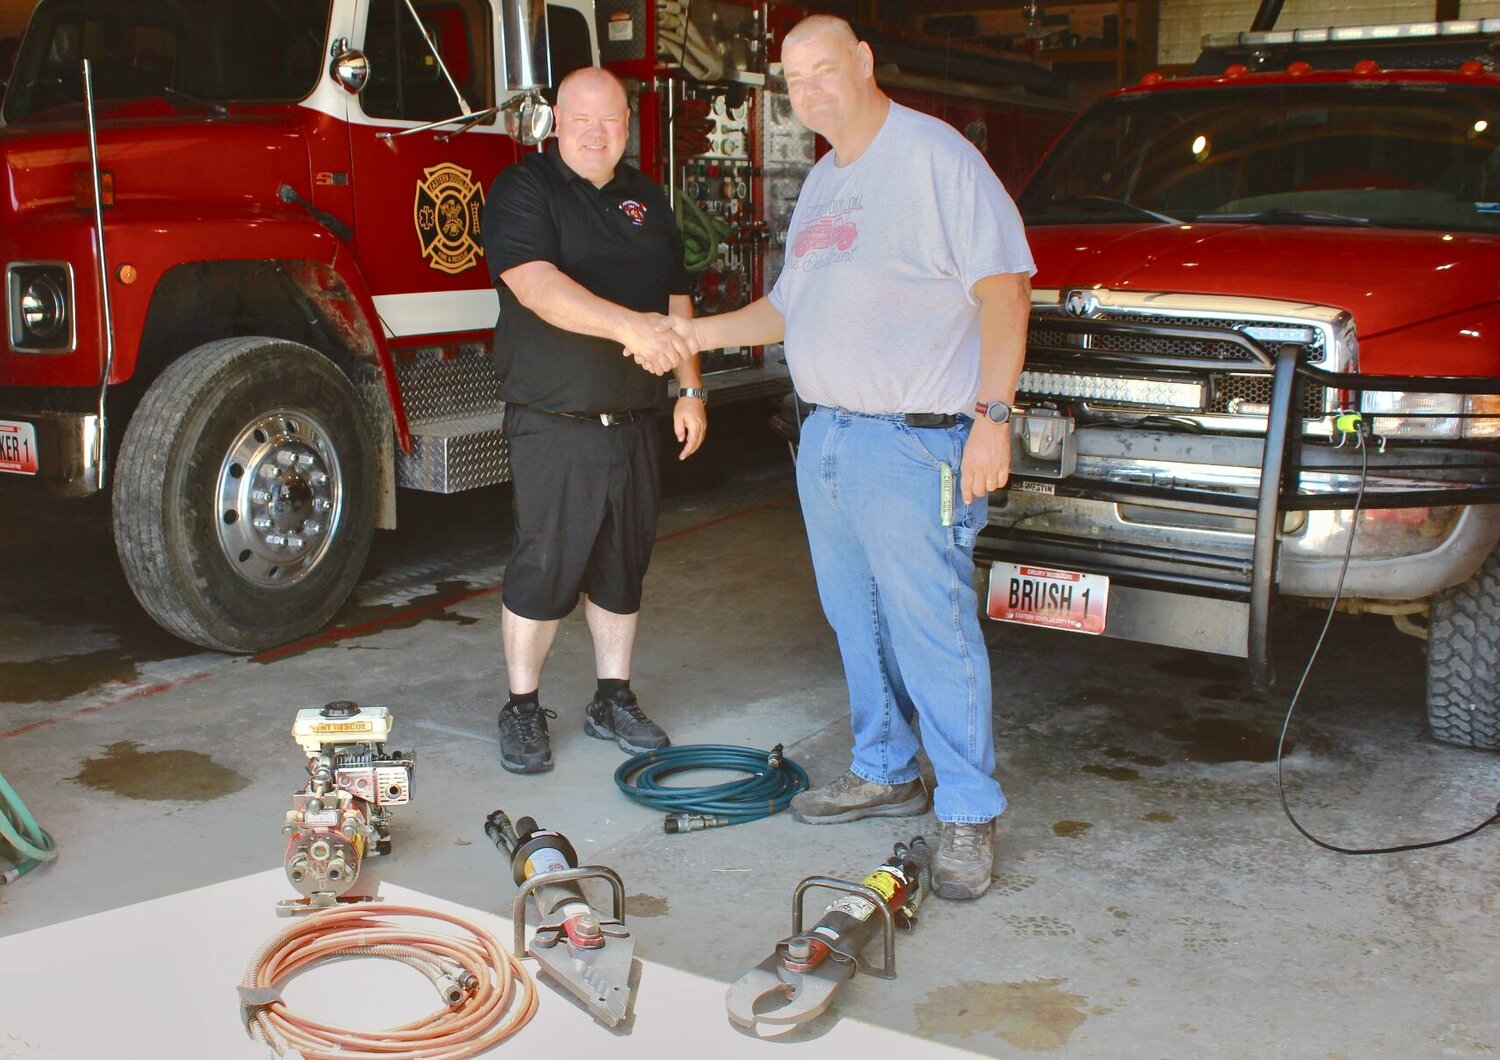 Last Sunday, the Eastern Douglas County Volunteer Fire Department welcomed Deputy Chief Gary Larrow of the Pecatonica, Ill., Fire Department. Larrow, left, was in the area to visit family members and made a special stop by EDCVFD to bring a donation, Public Information Officer Kathy Gifford with the local fire department. Items donated were newer, more compact extrication tools, consisting of a combination cutter/splitter, cutter, hoses and a compressor. Commonly known as " The Jaws of Life,’’ Gifford explained, the tools are crucial in the event of motor vehicle accidents. “We at Eastern Douglas are so grateful for this generous donation, and would like to thank Deputy Chief Larrow and the Pecatonica Fire Department for their generosity,” said Gifford. “Donations such as these provide the department with the tools necessary for us to be more effective and efficient in serving our community." Receiving the donation on behalf of the fire department is EDCFVD Chief Chris Hammett.